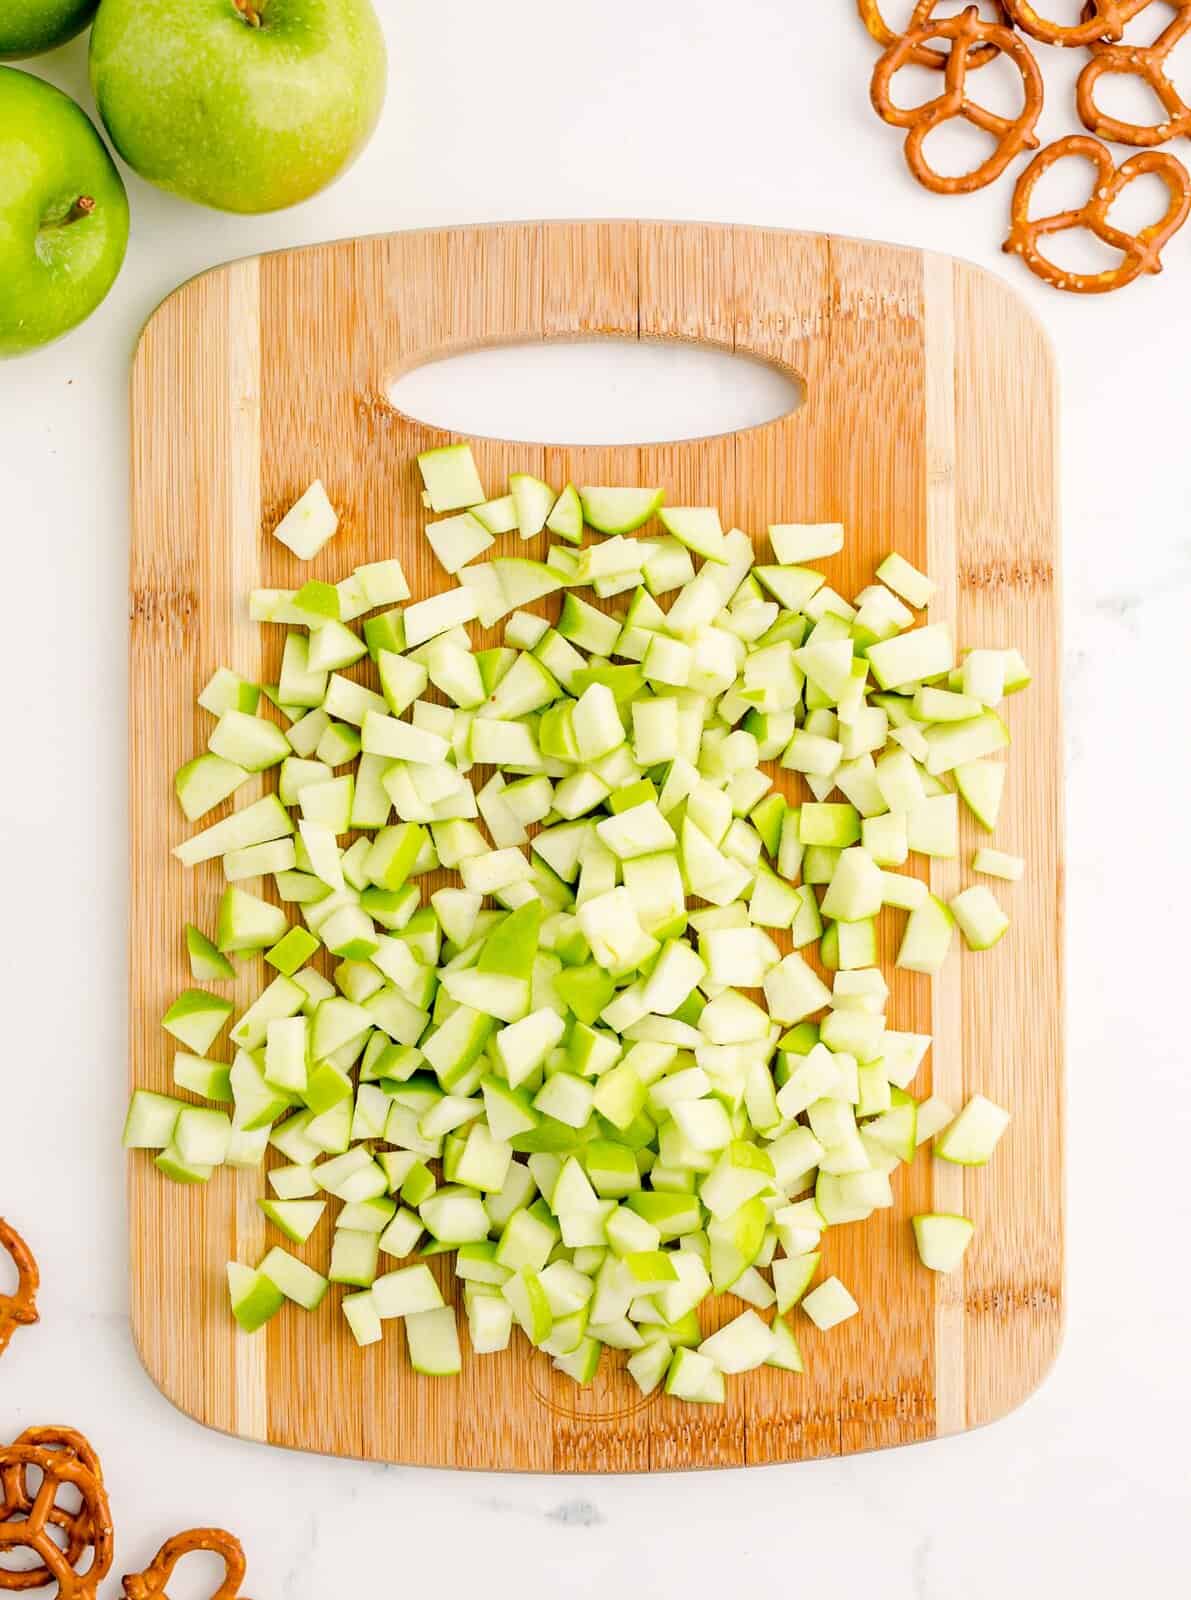 Apples diced up on wooden cutting board.